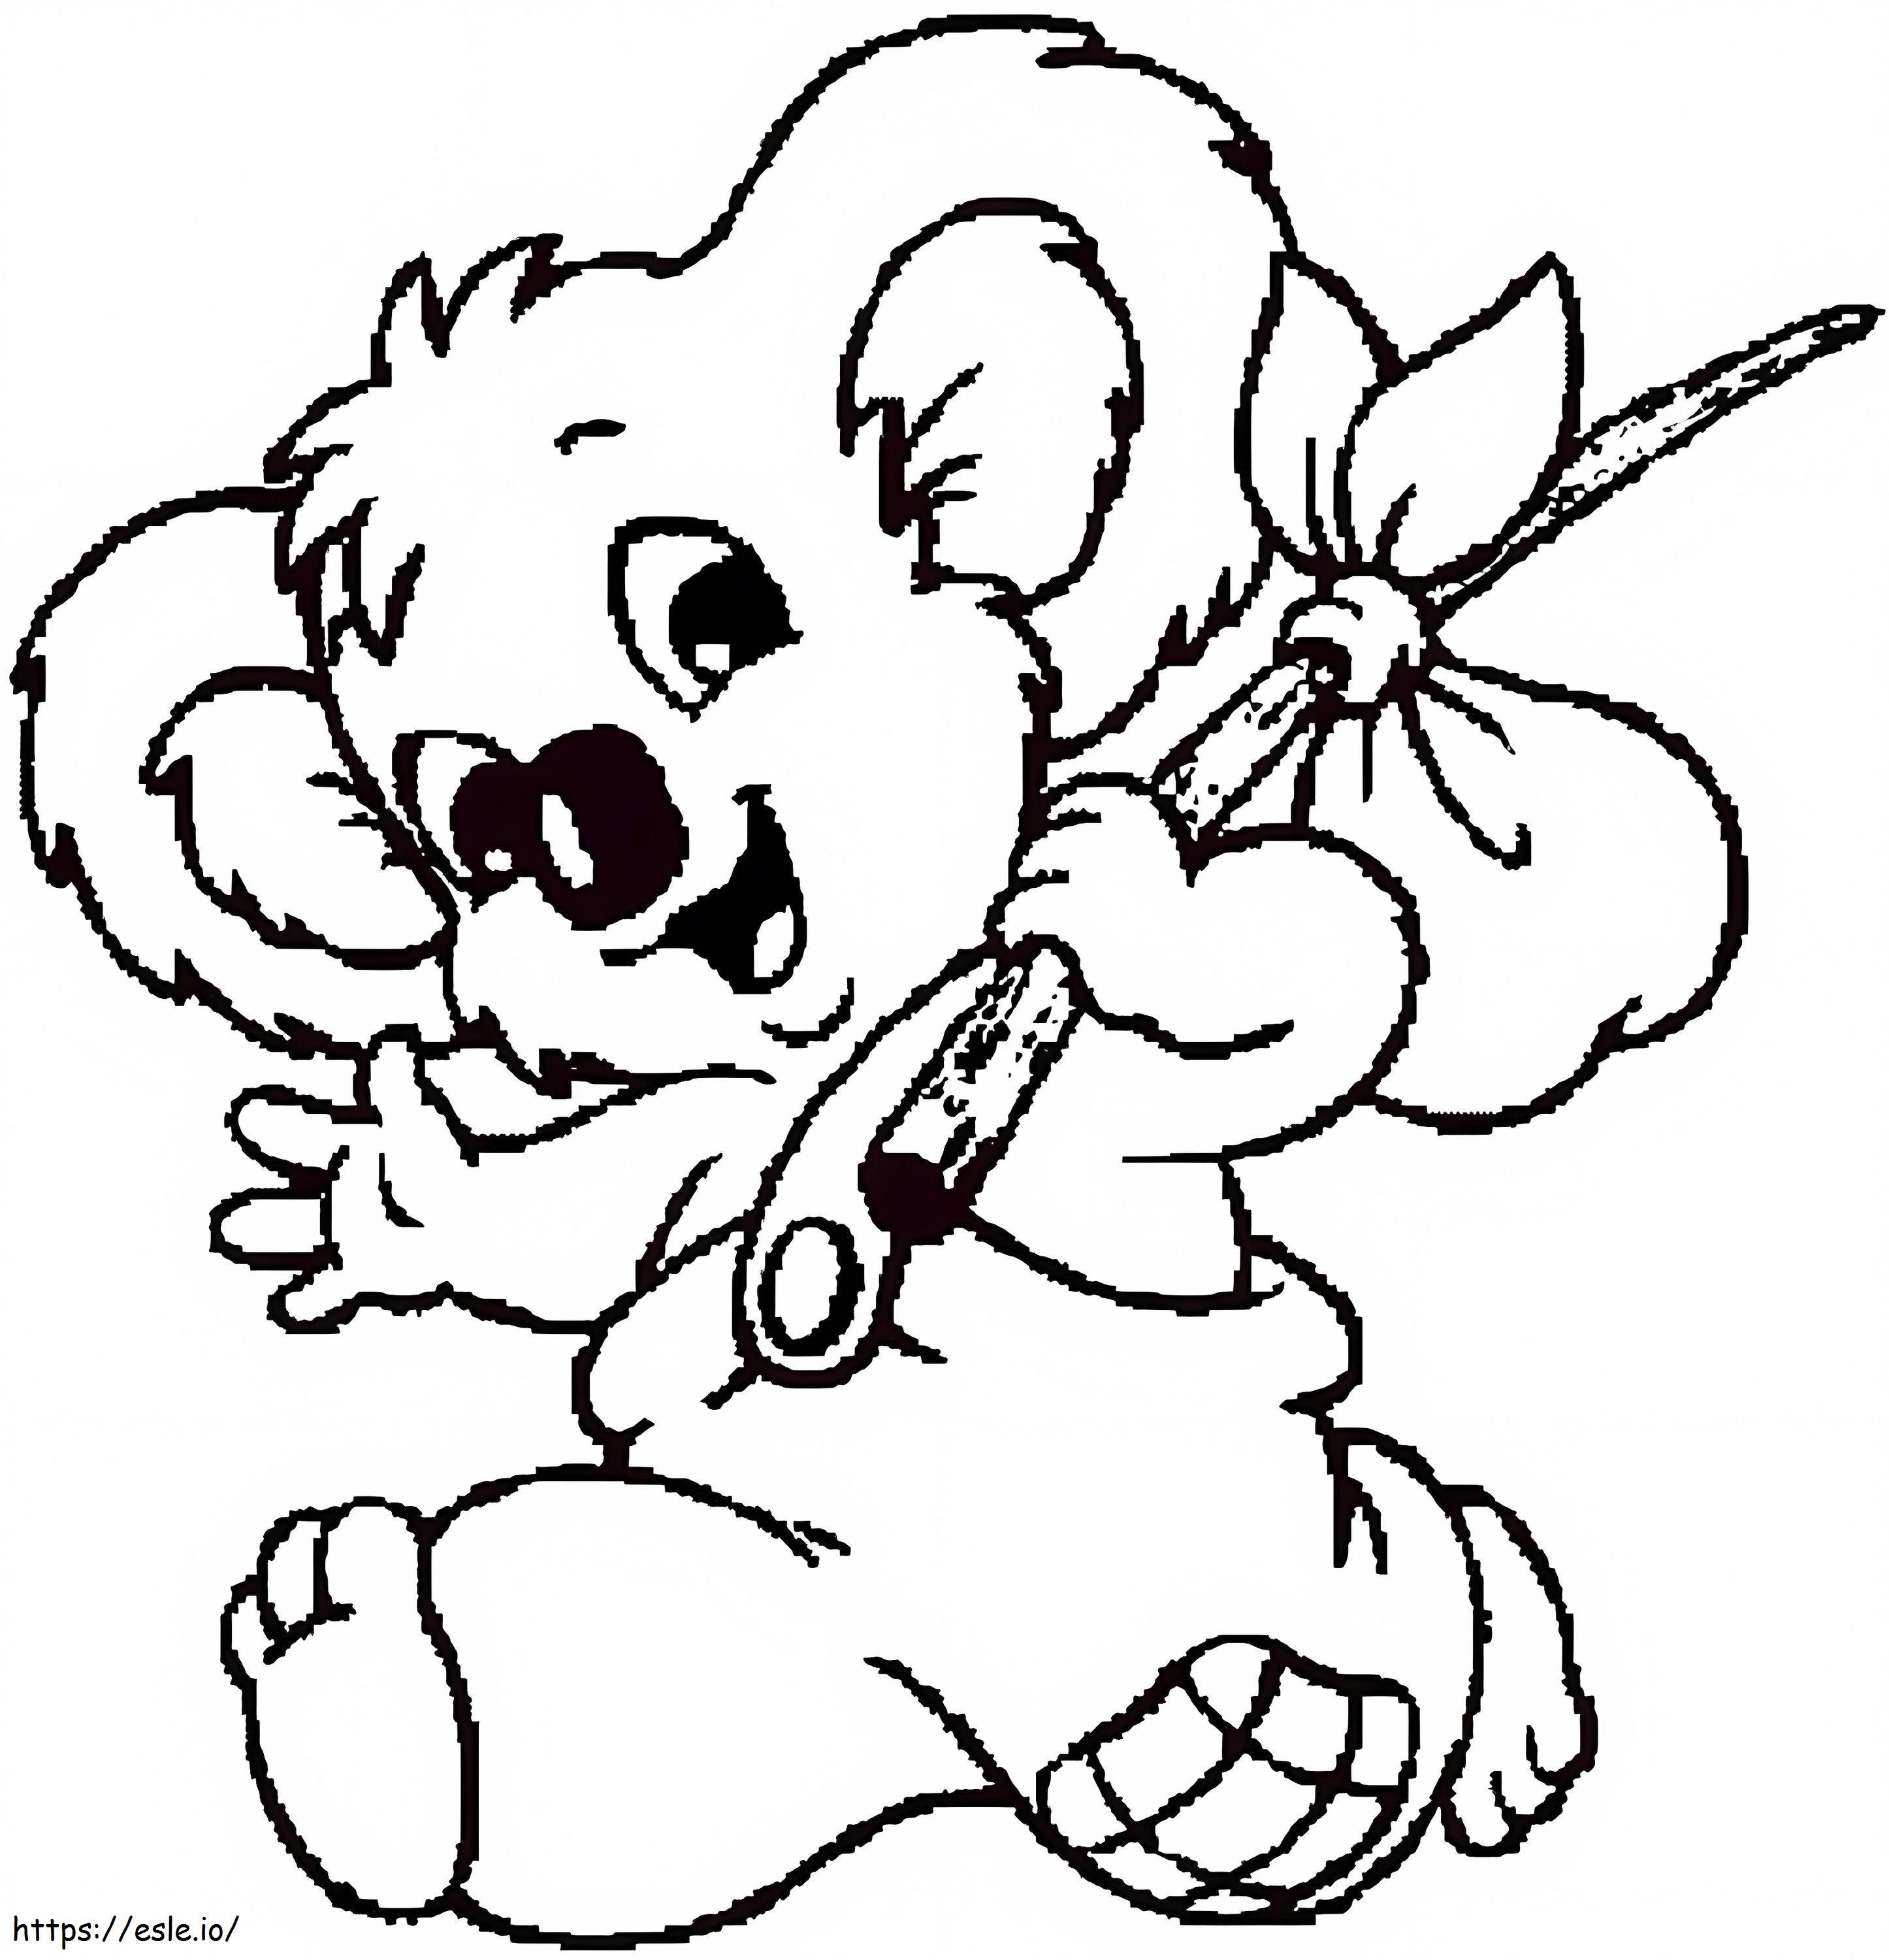 Adorable Blinky Bill coloring page